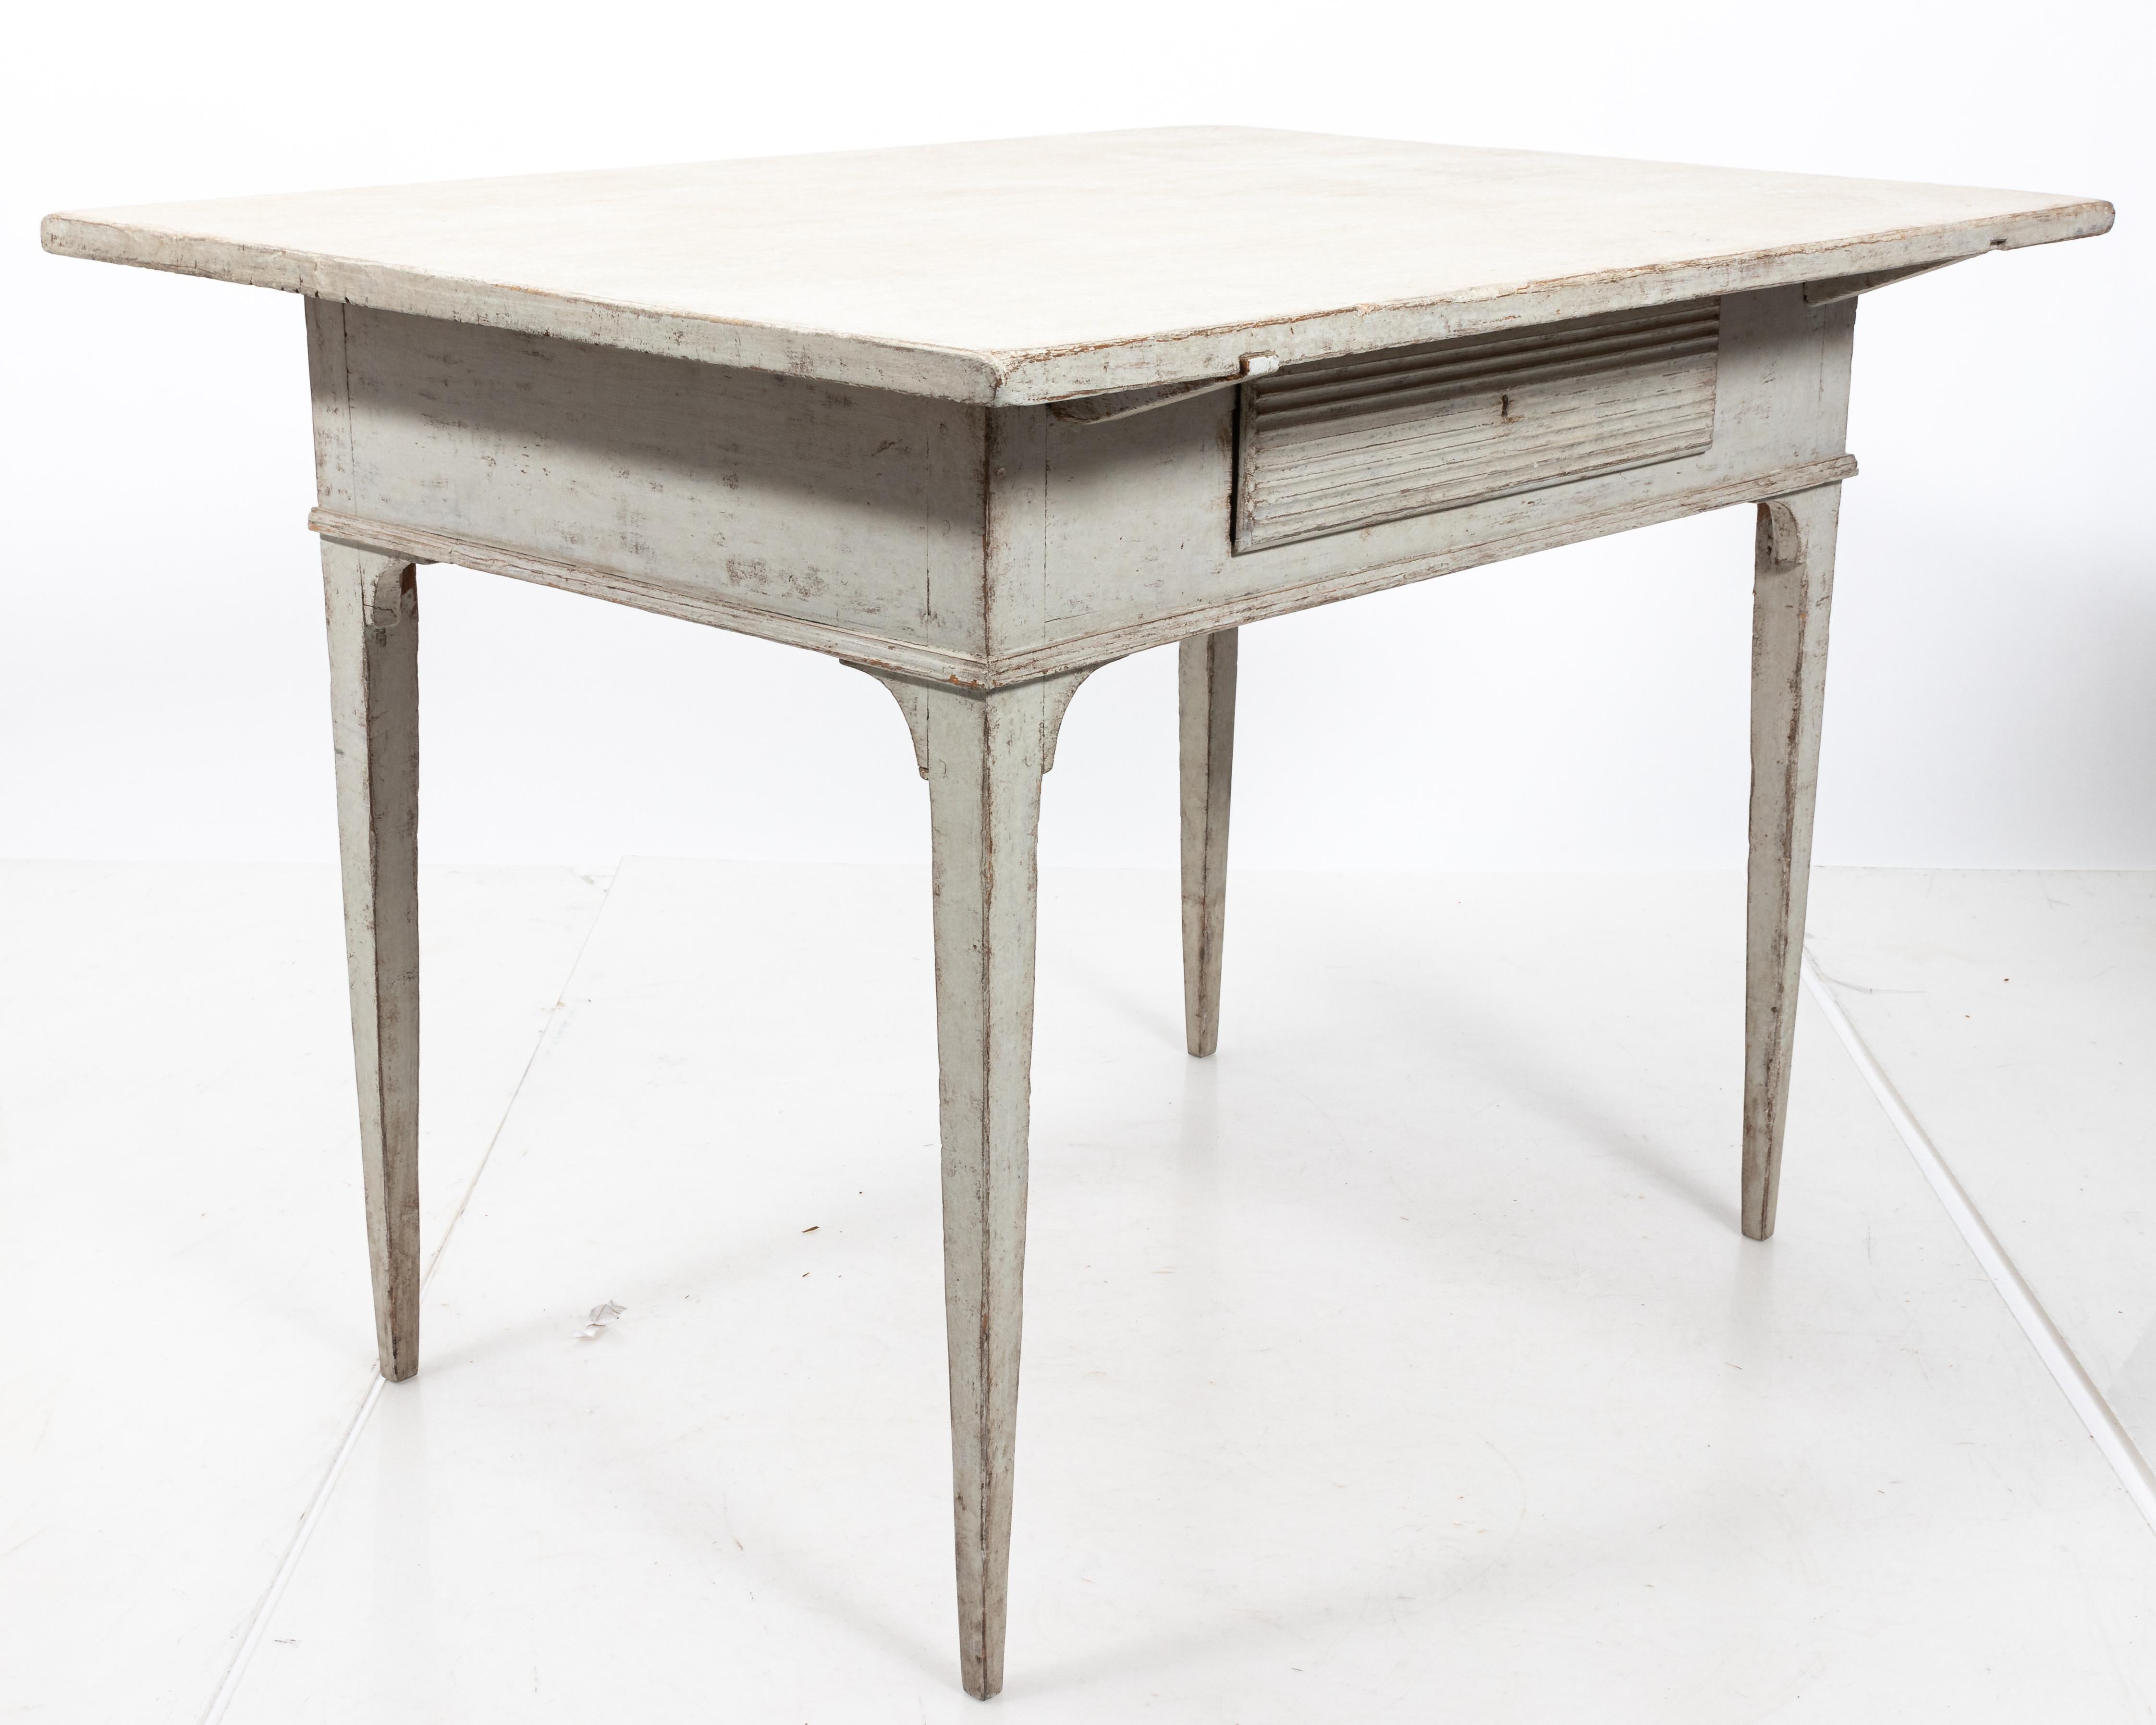 19th century Gustavian side table with a single reeded front drawer. Please note of wear consistent with age including paint loss. Made in Sweden.